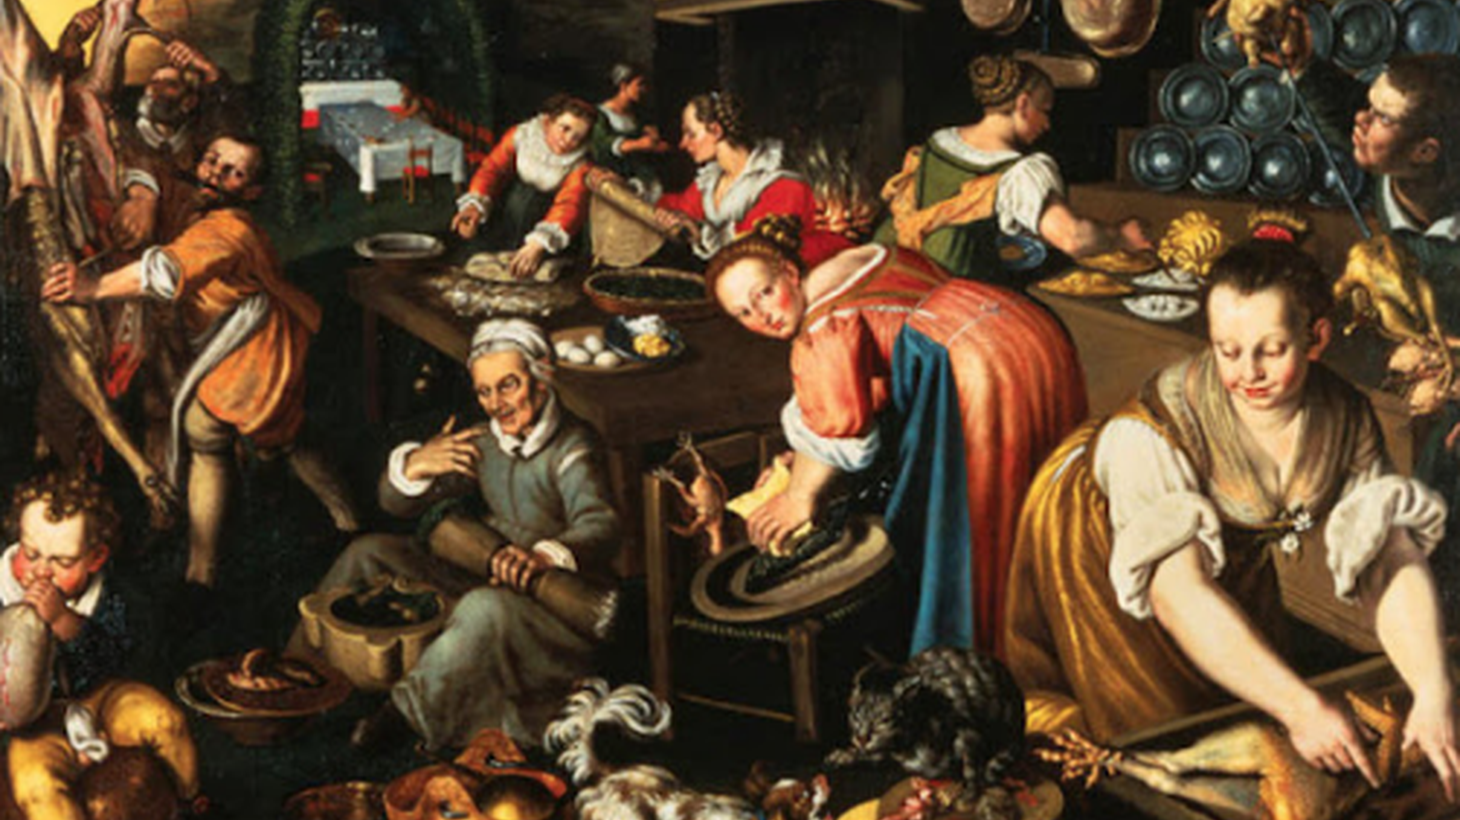 Yale Professor Paul Freedman teaches a history course focusing on food, explaining that Medieval food was highly spiced, but later European food rejected the seasonings in anything except desserts.